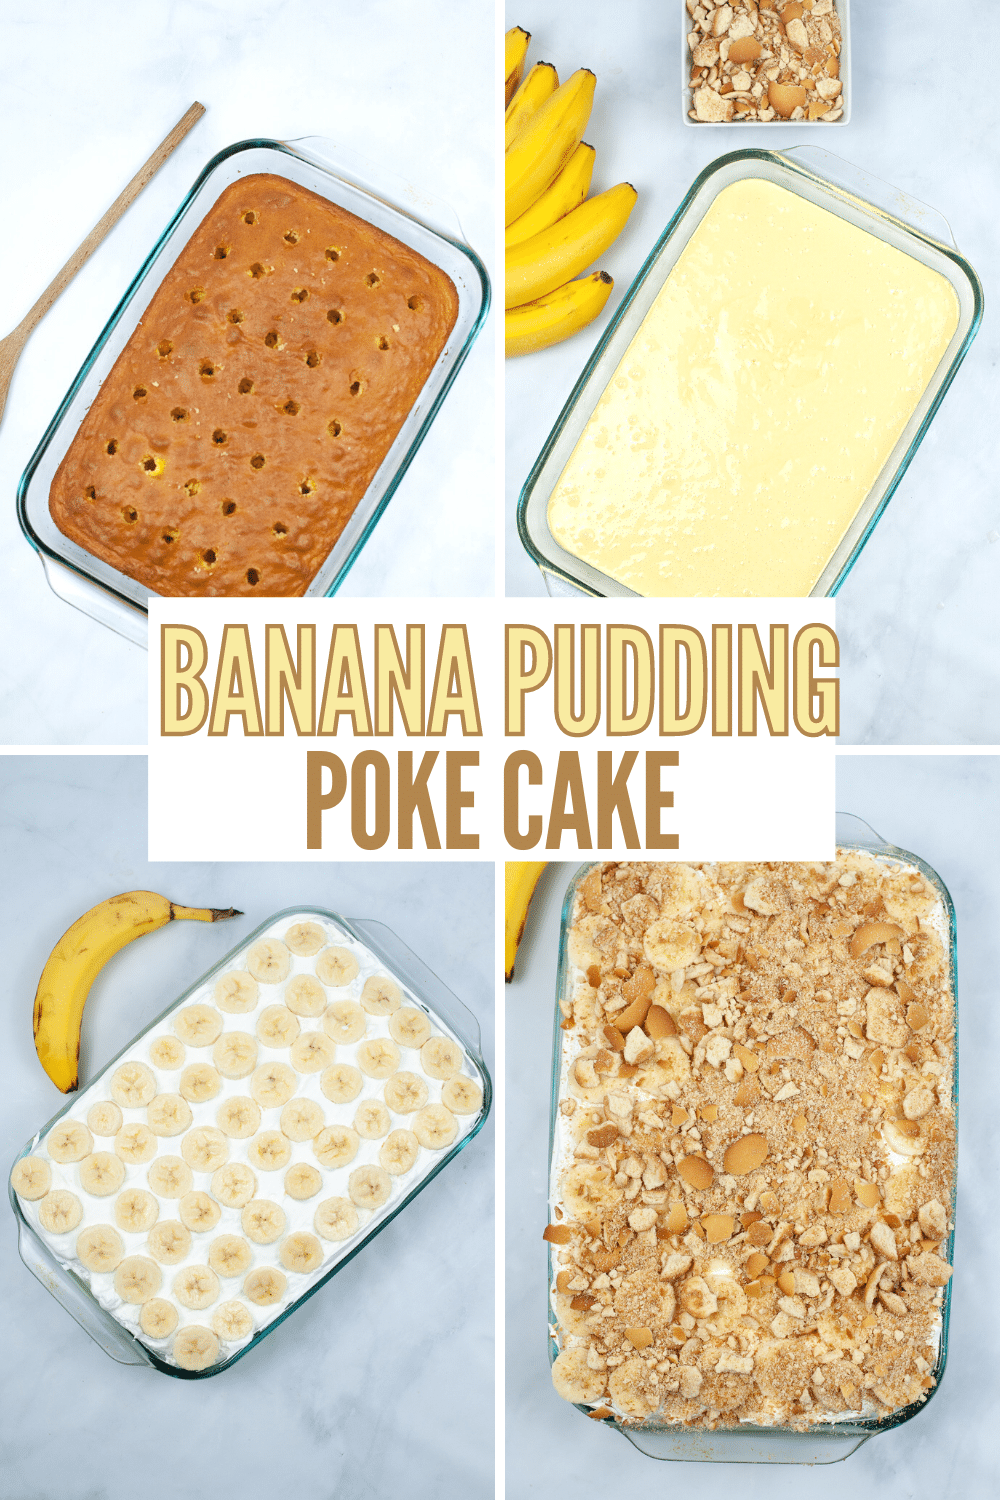 This banana pudding poke cake is a fun version of your favorite traditional banana pudding. All the flavors of banana pudding are here! #bananapudding #pokecake #bananacake #cake #dessert via @wondermomwannab